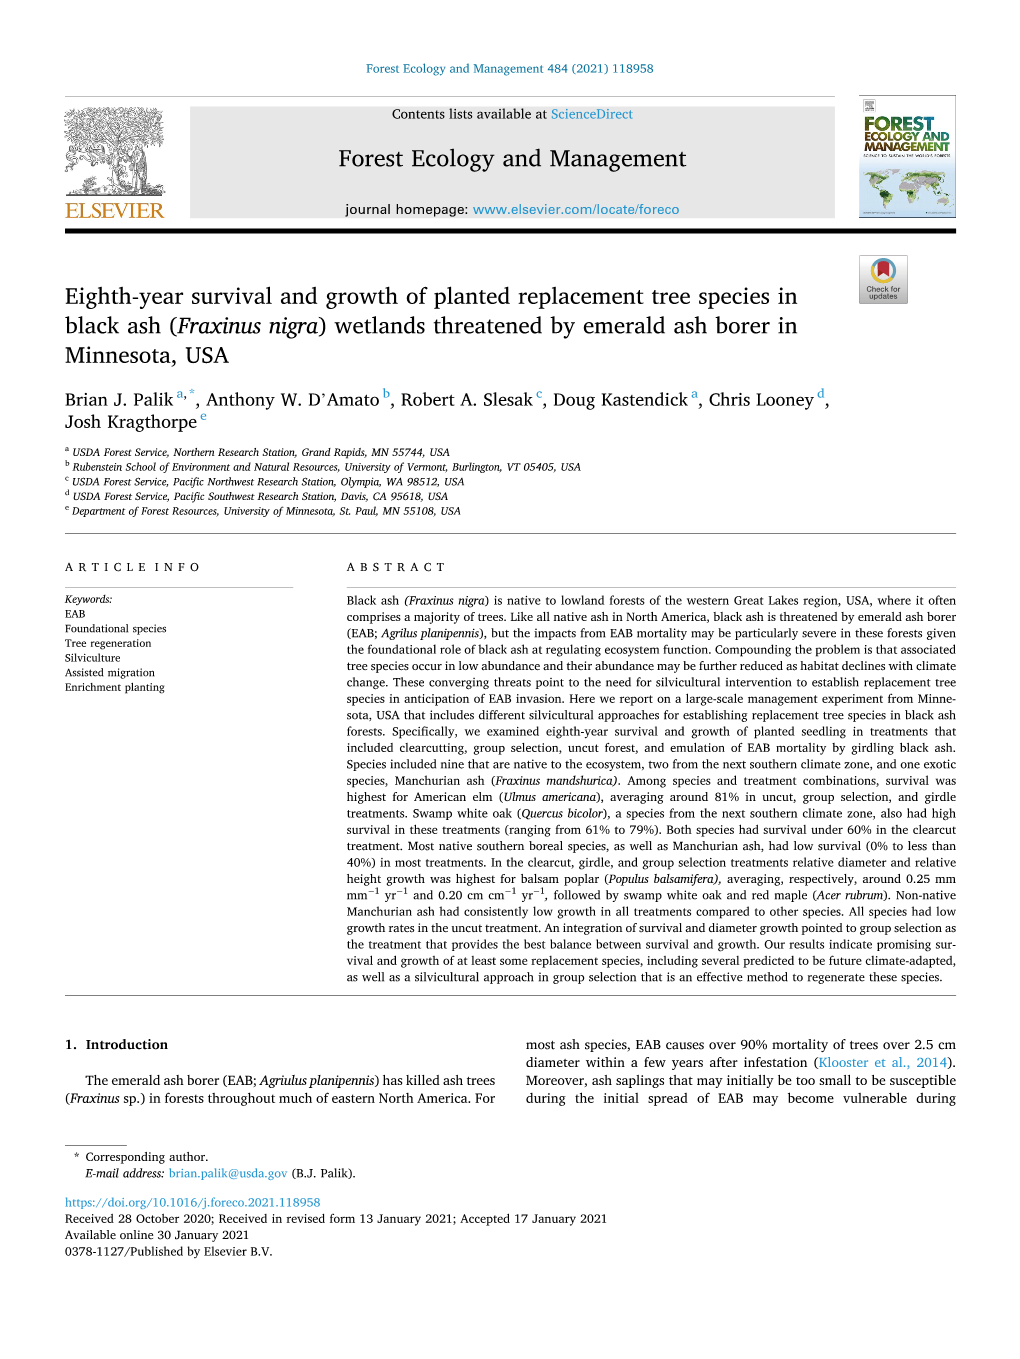 Eighth-Year Survival and Growth of Planted Replacement Tree Species in Black Ash ( Fraxinus Nigra ) Wetlands Threatened by Emera